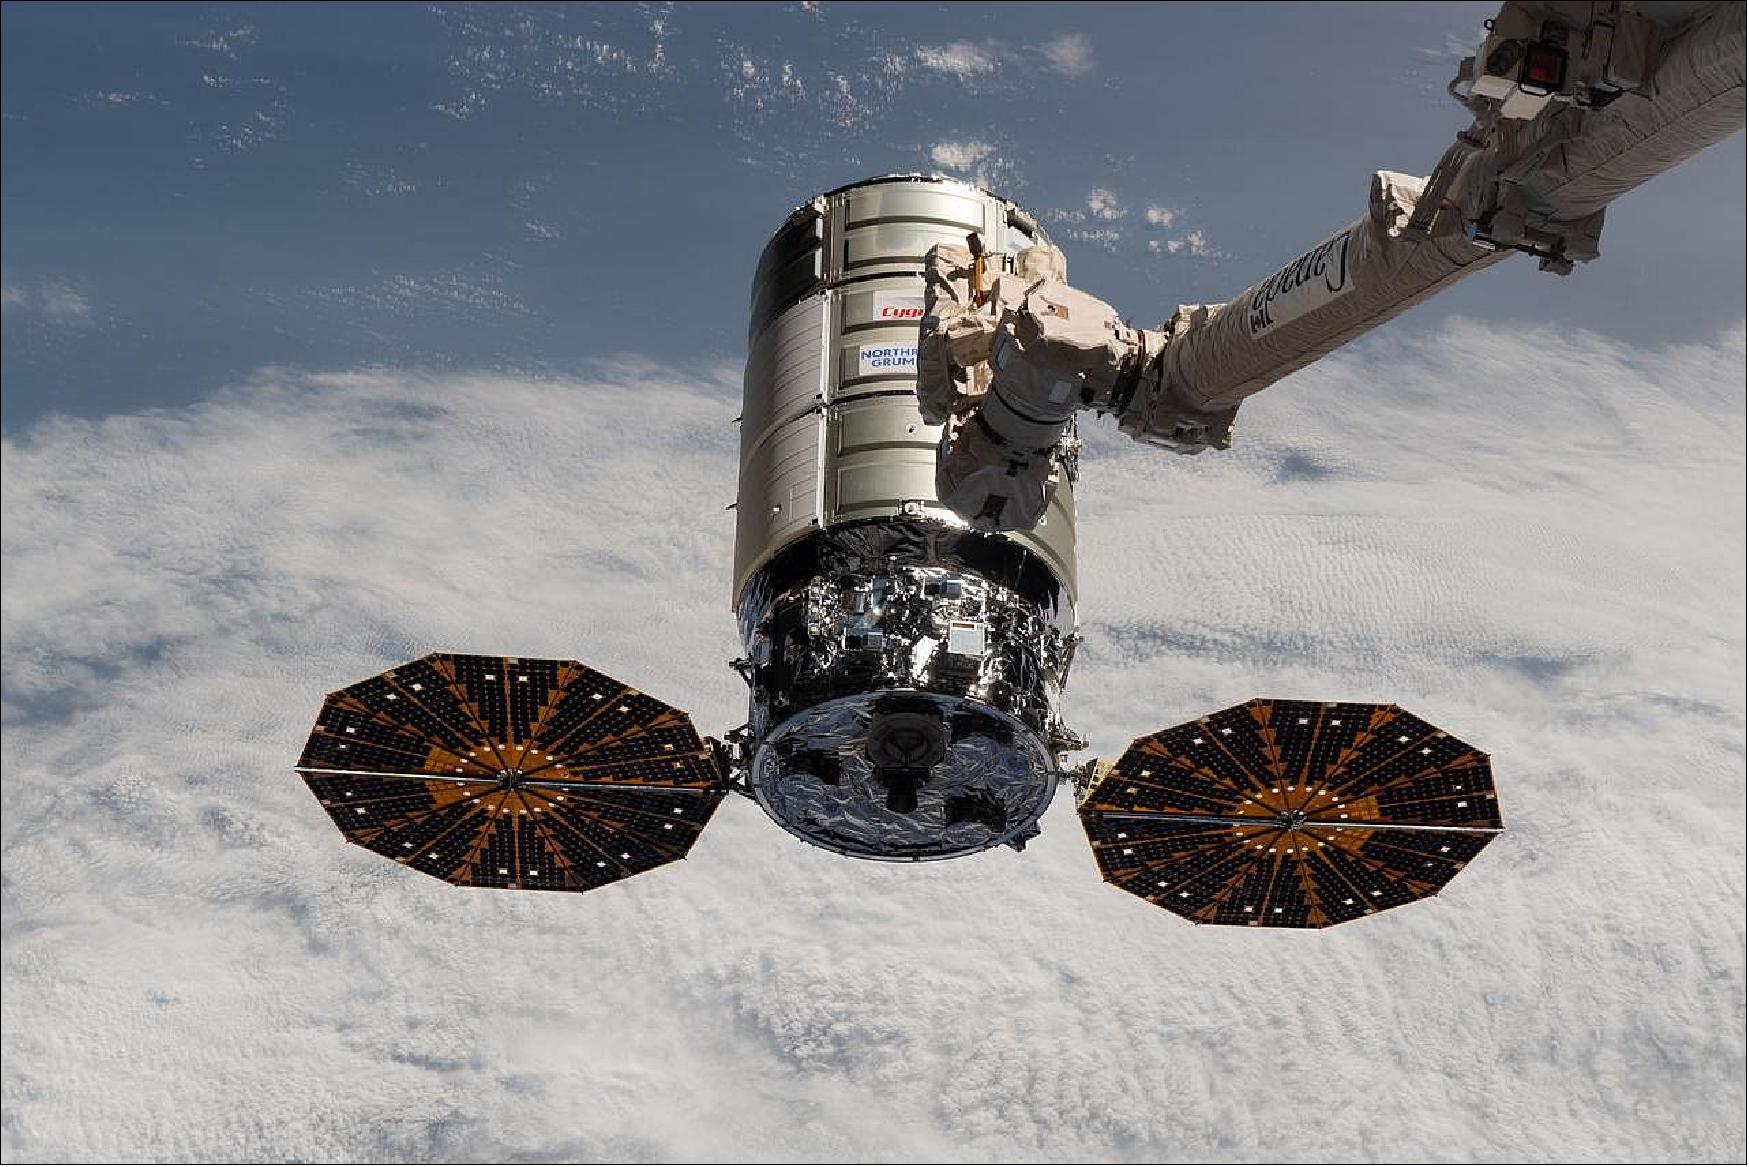 Figure 4: On October 5, the Cygnus NG-14 space freighter approaches the ISS where the Canadarm2 robotic arm is poised to capture it for docking (image credit: NASA)